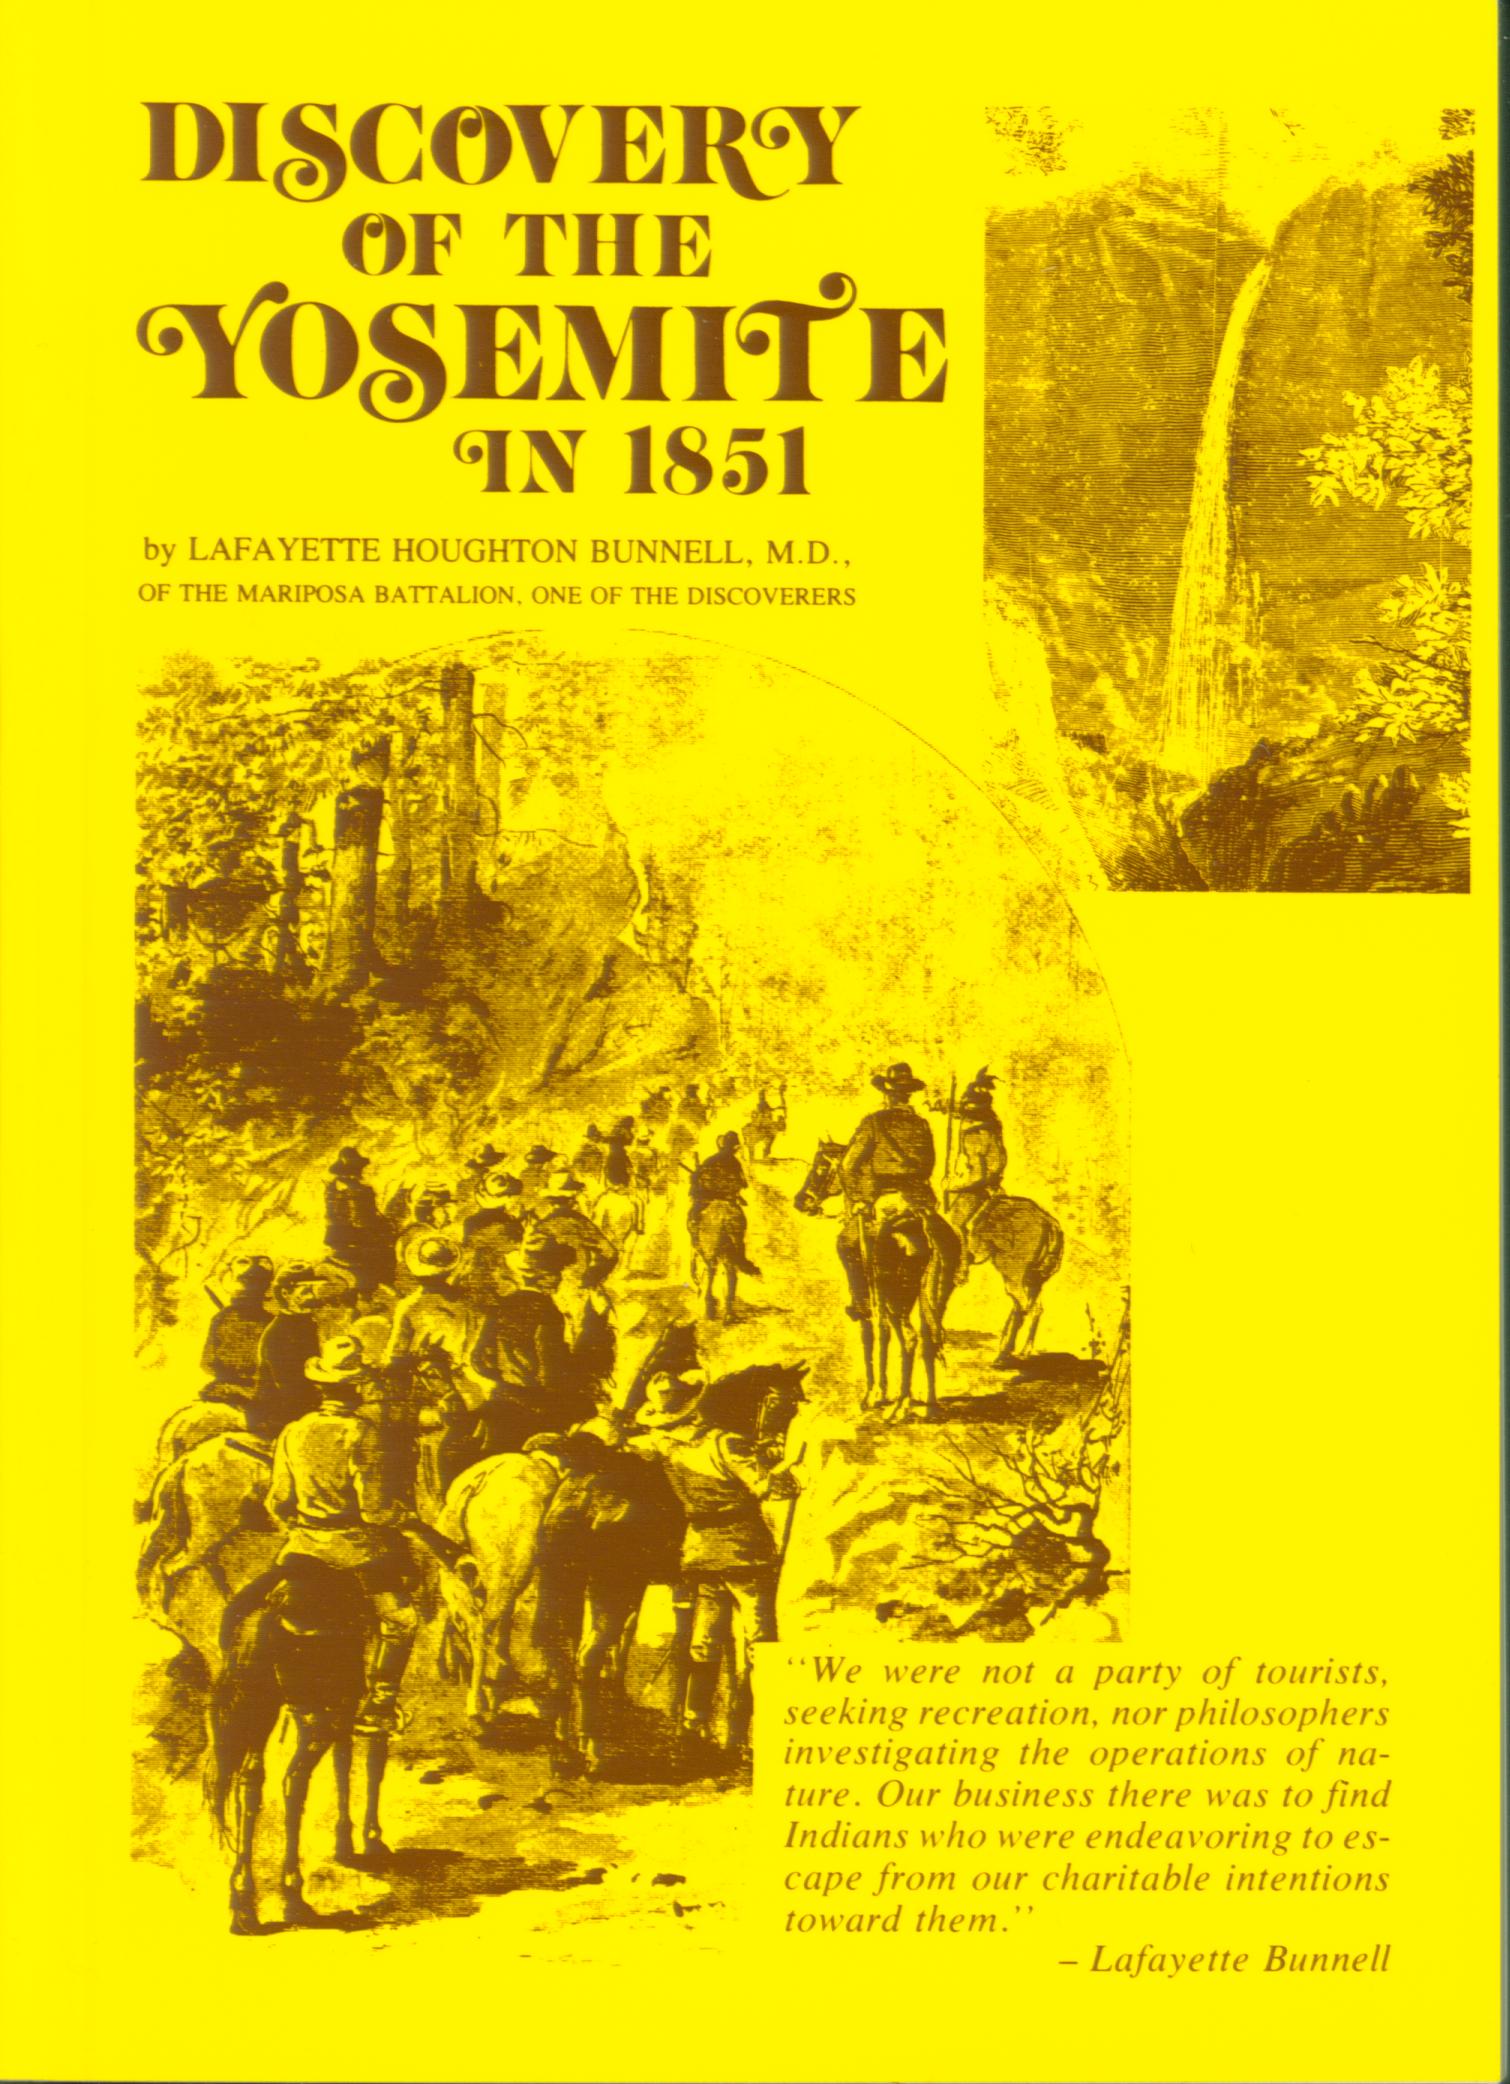 Bunnell, Lafayette. Discovery of the Yosemite in 1851. vist0021 front cover mini